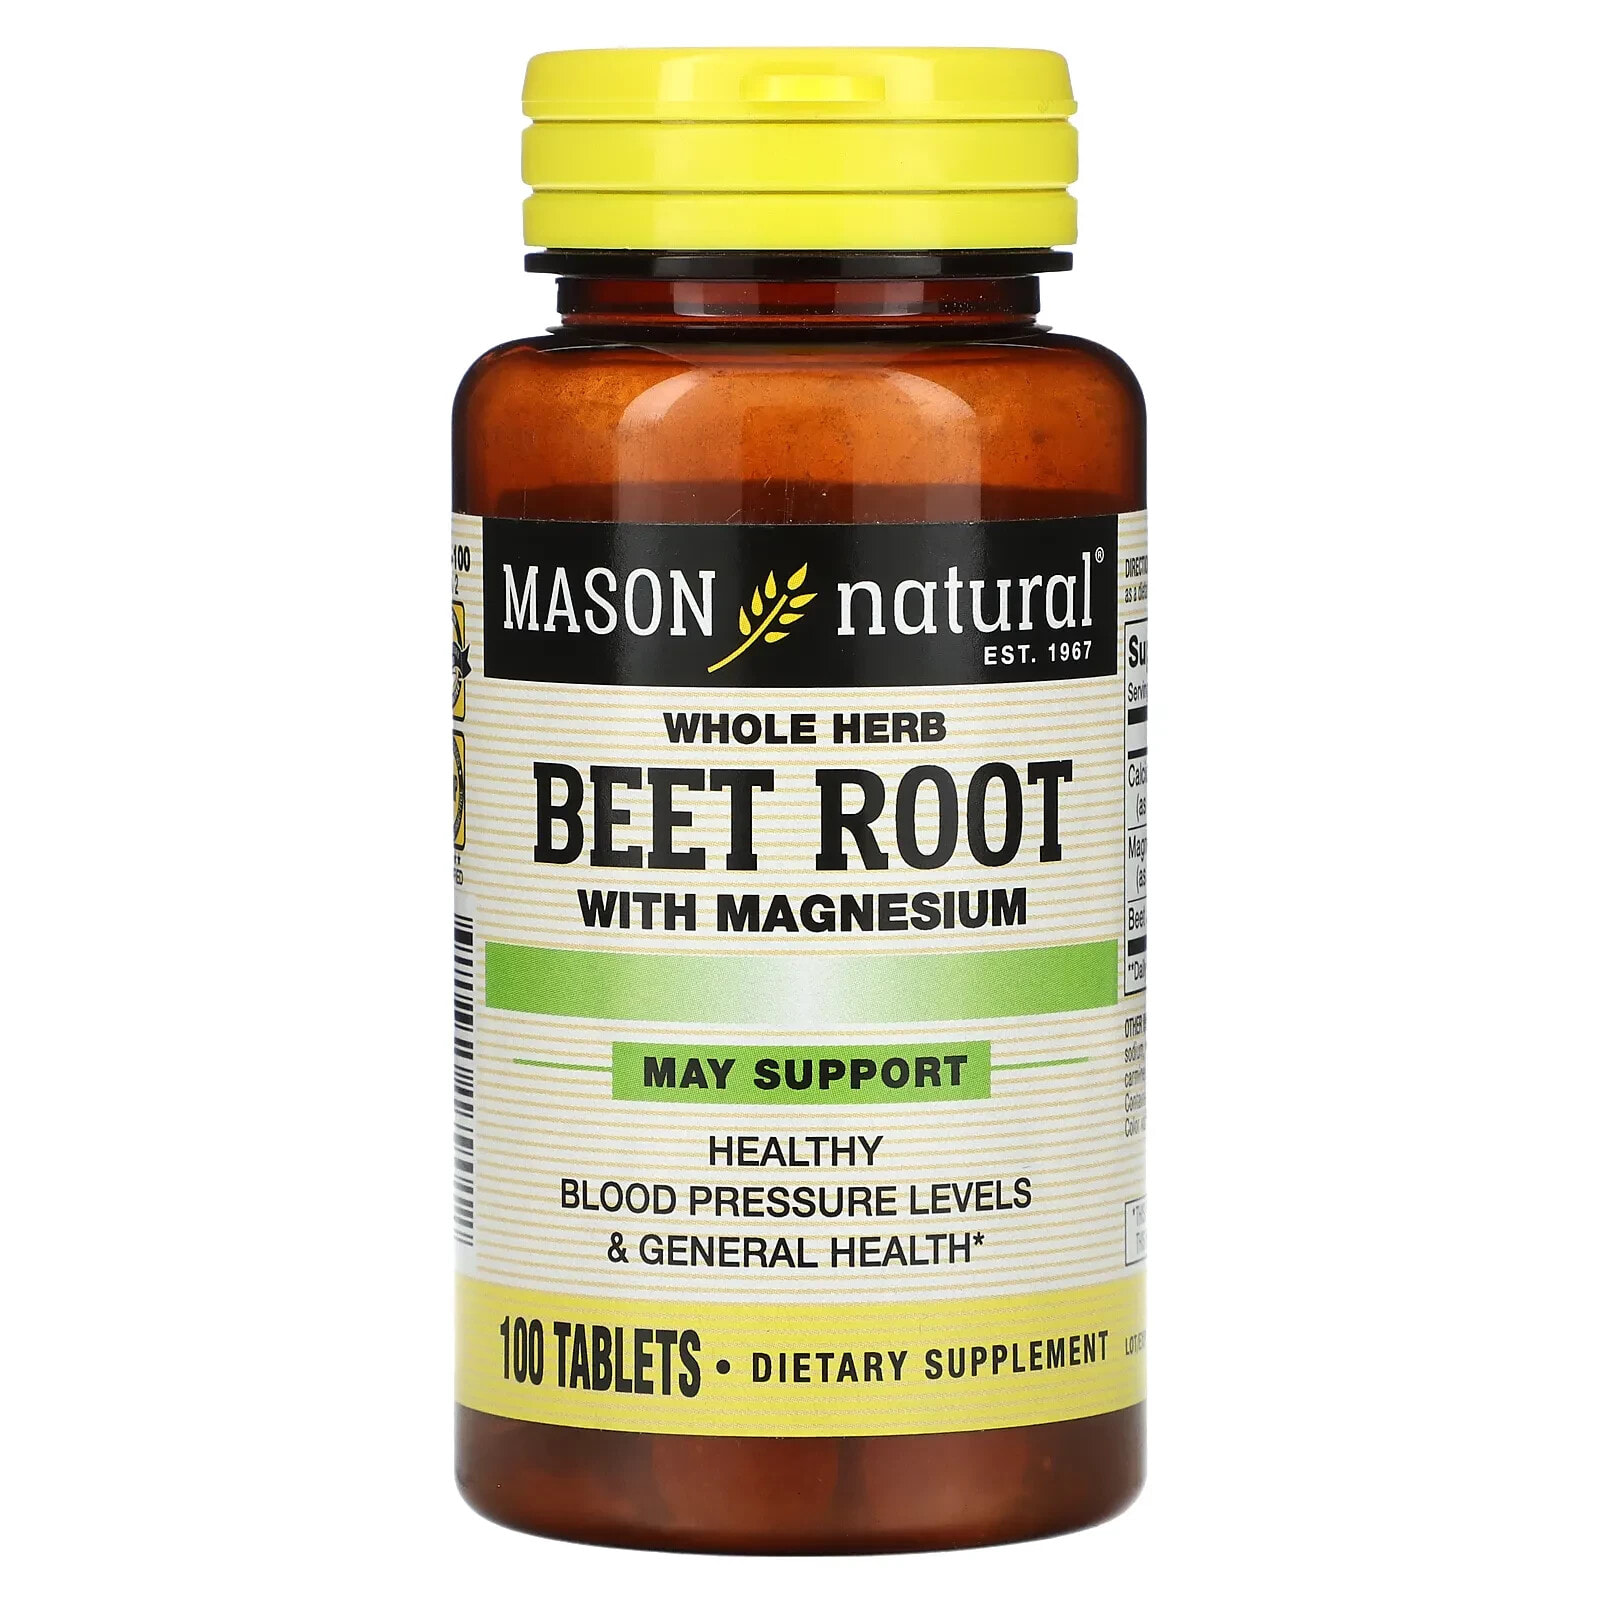 Whole Herb Beet Root with Magnesium, 100 Tablets